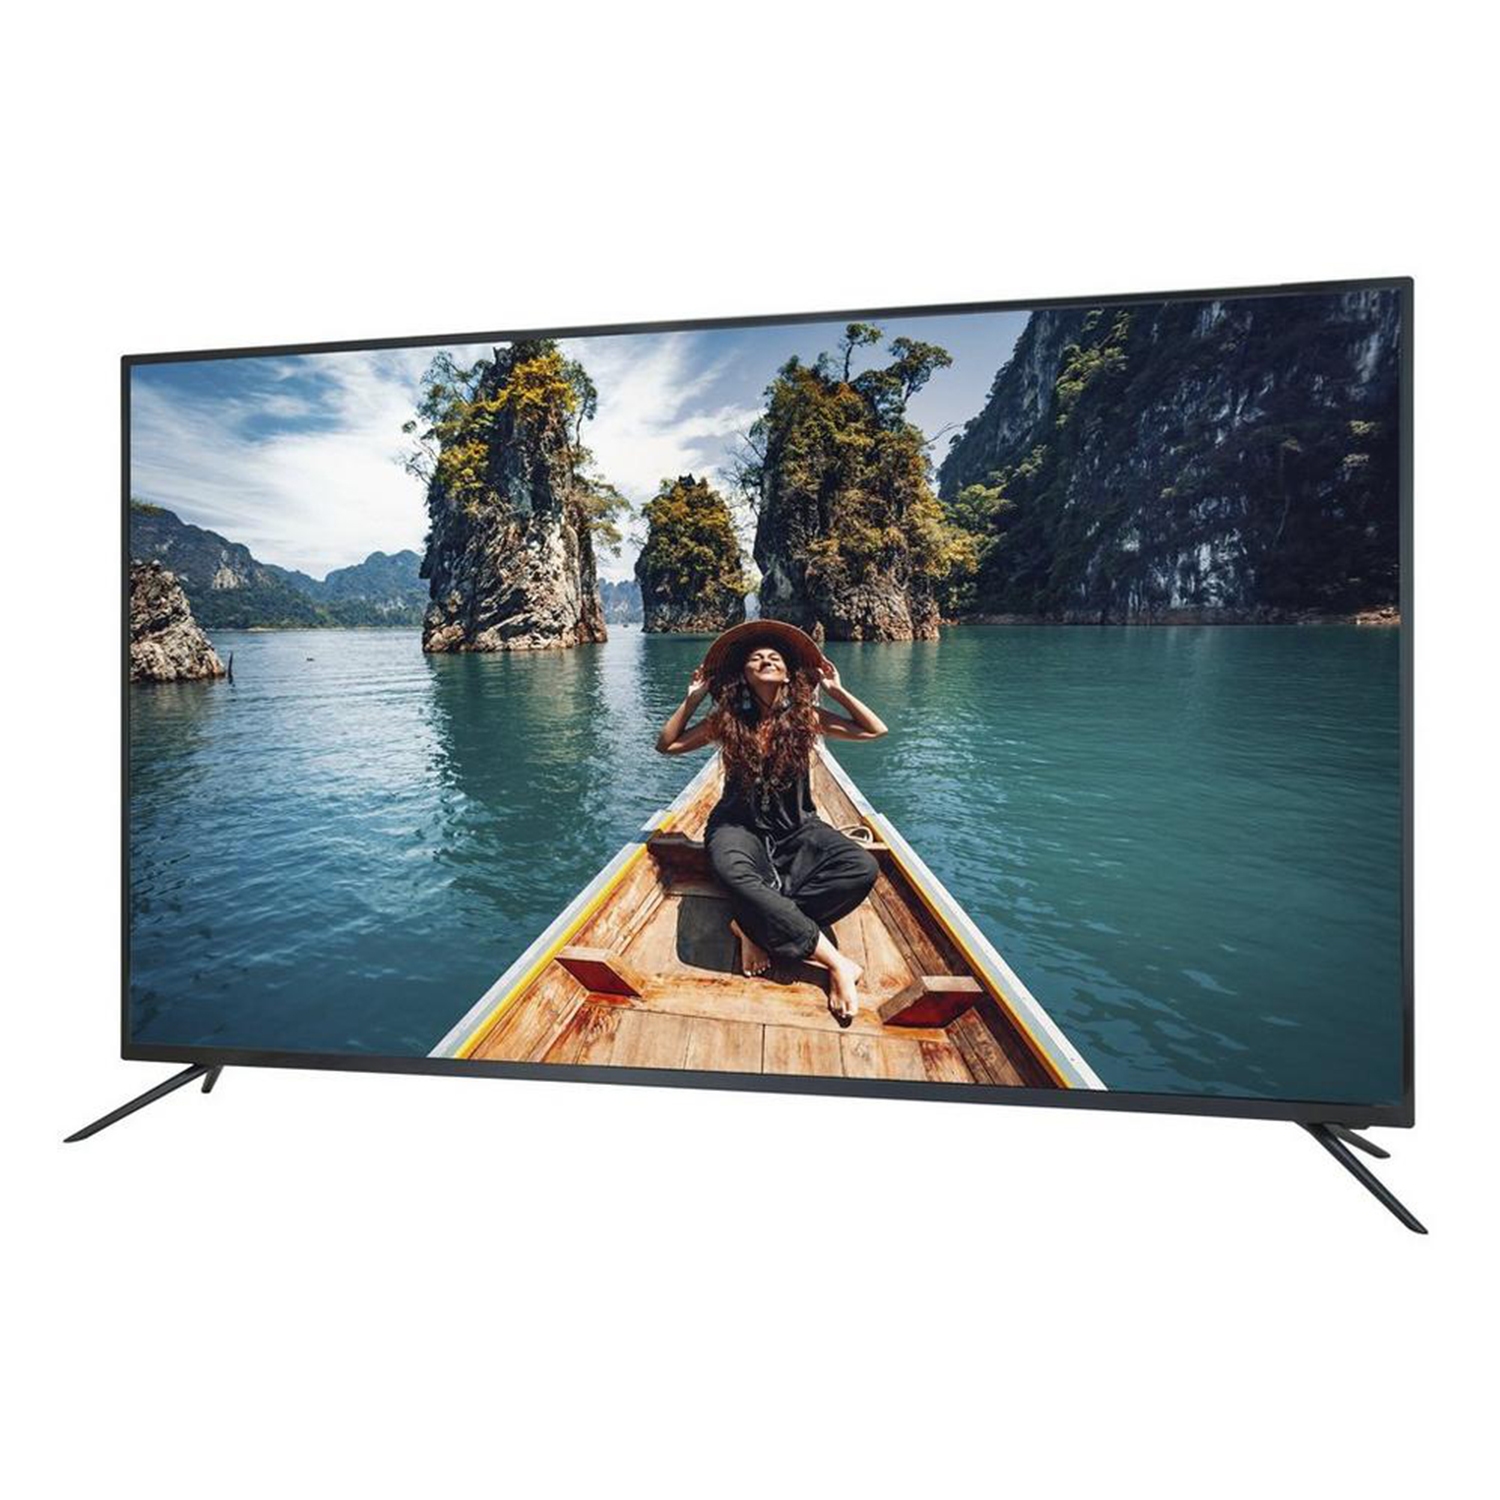 Linsar 58UHD8050FP 58" 4K LED Smart TV - with Freeview Play - 2